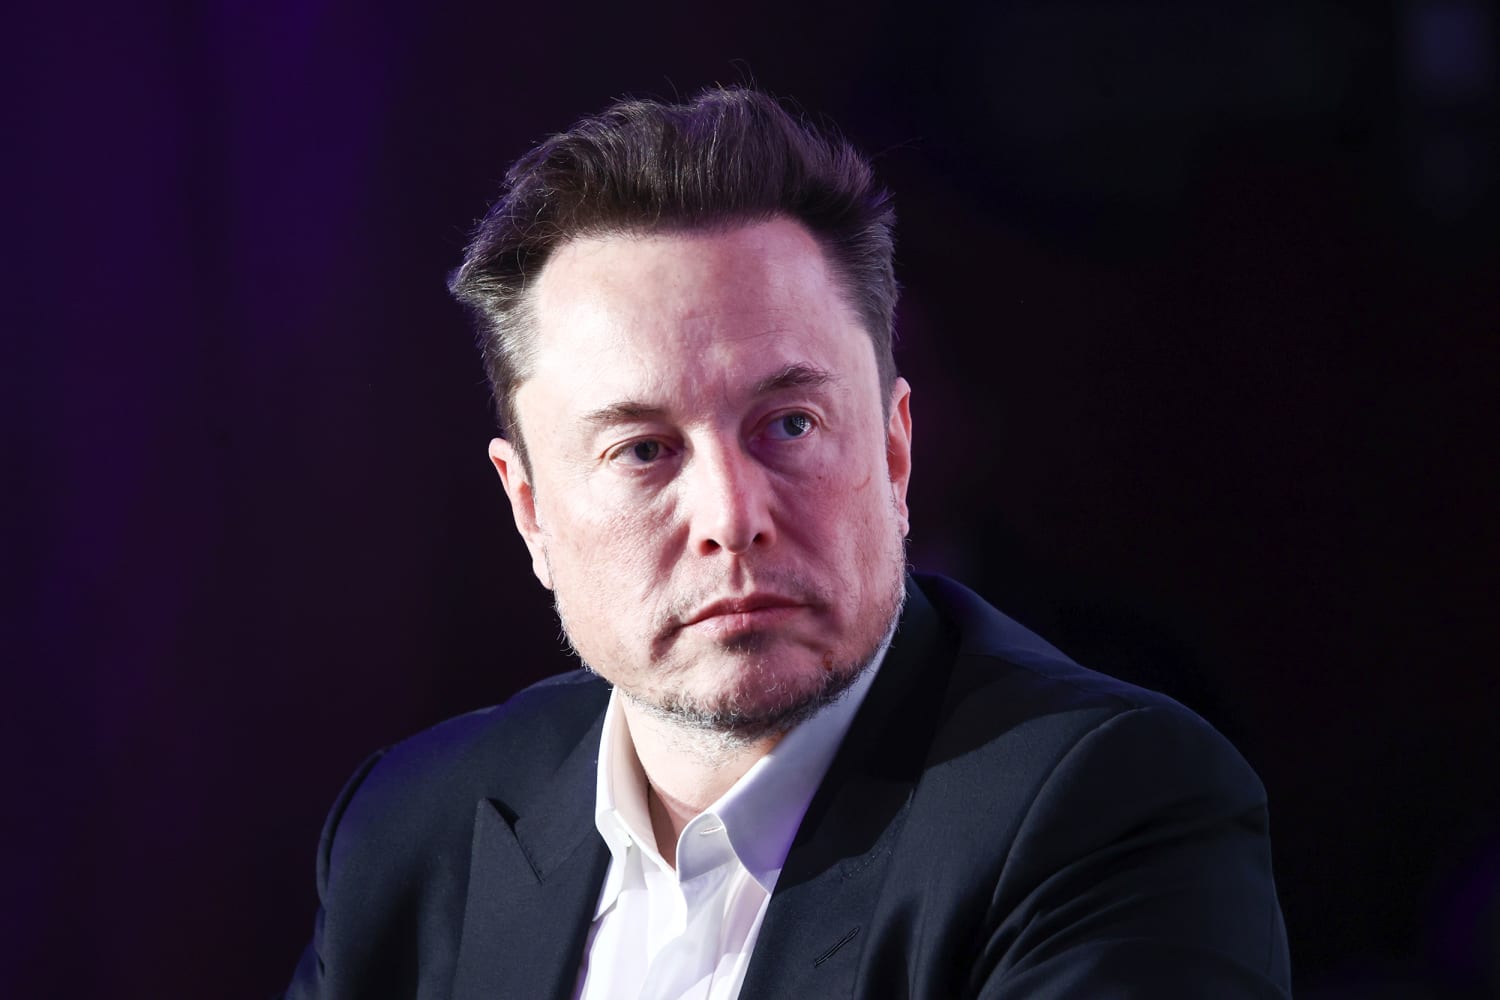 Elon Musk Faces Backlash for Sharing Shocking Video Amid Haiti Crisis: A Deep Dive into Social Media's Battle with Truth and Safety